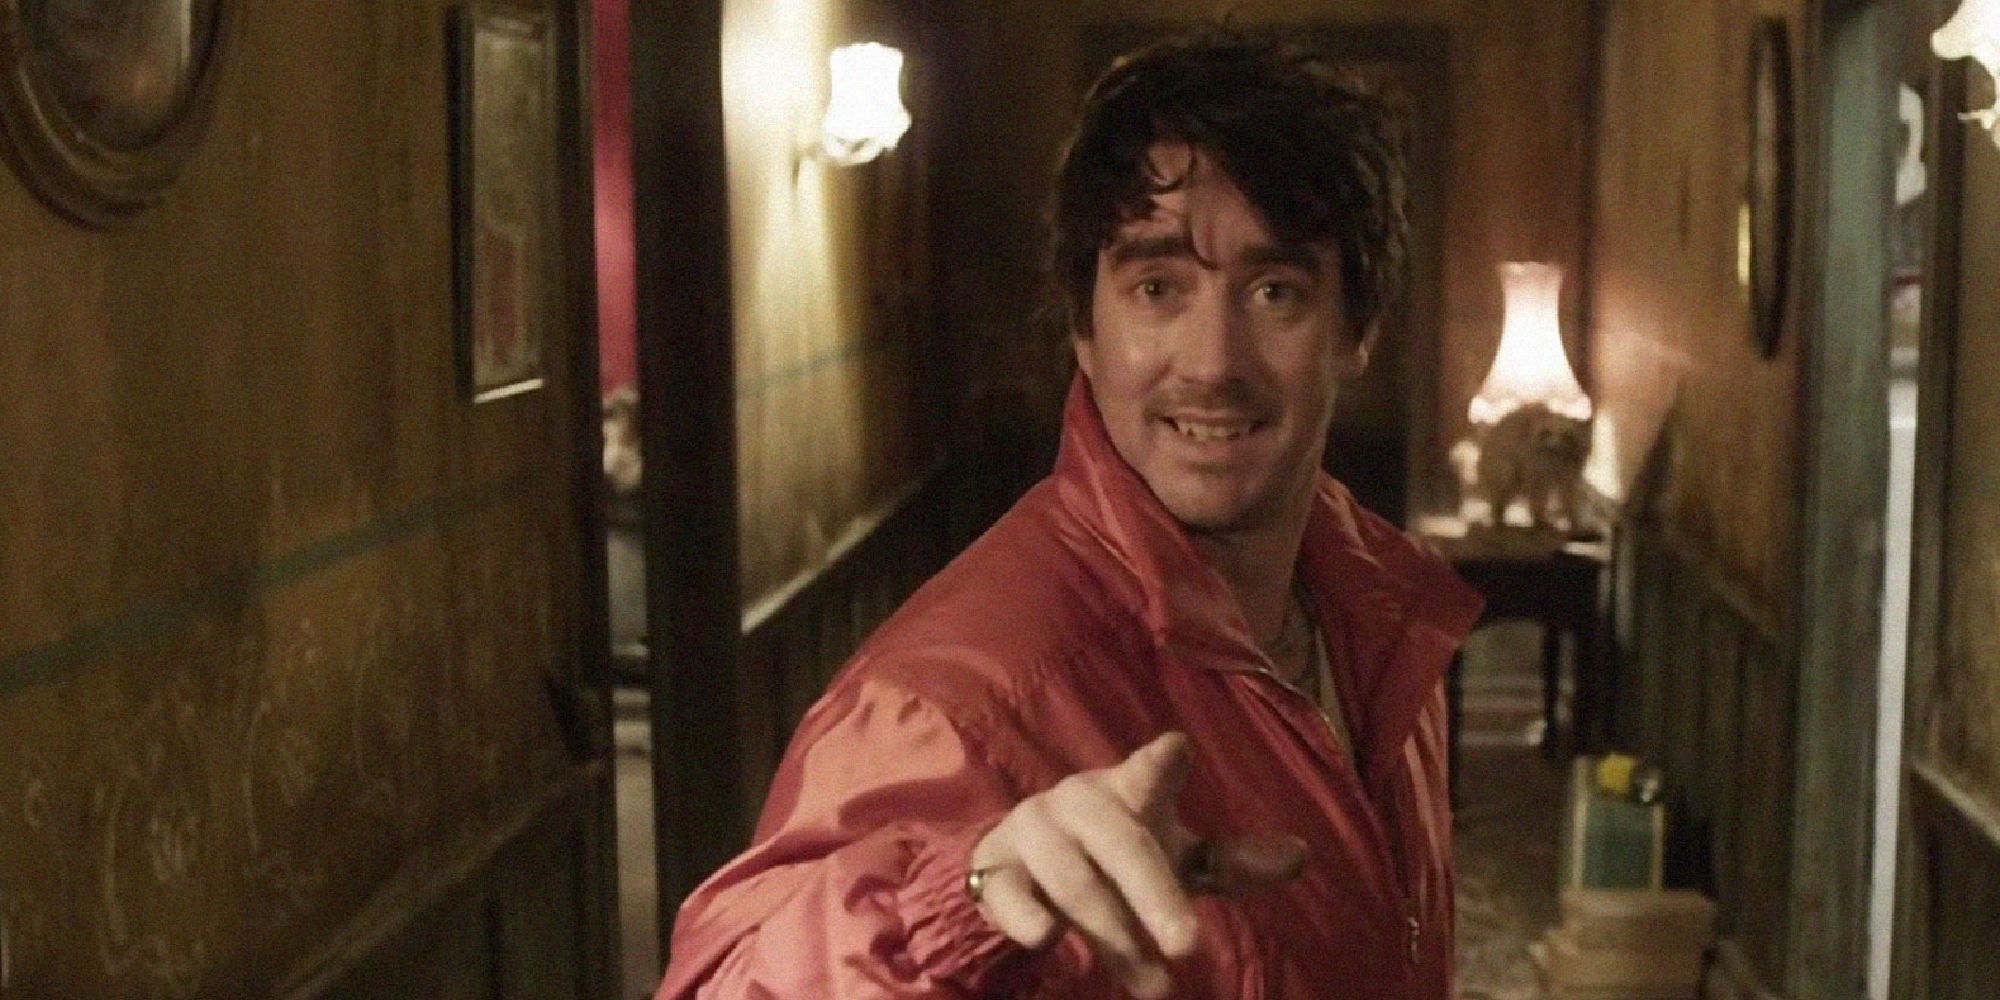 Jonathan Brugh as Deacon talking to the camera in What We Do In The Shadows